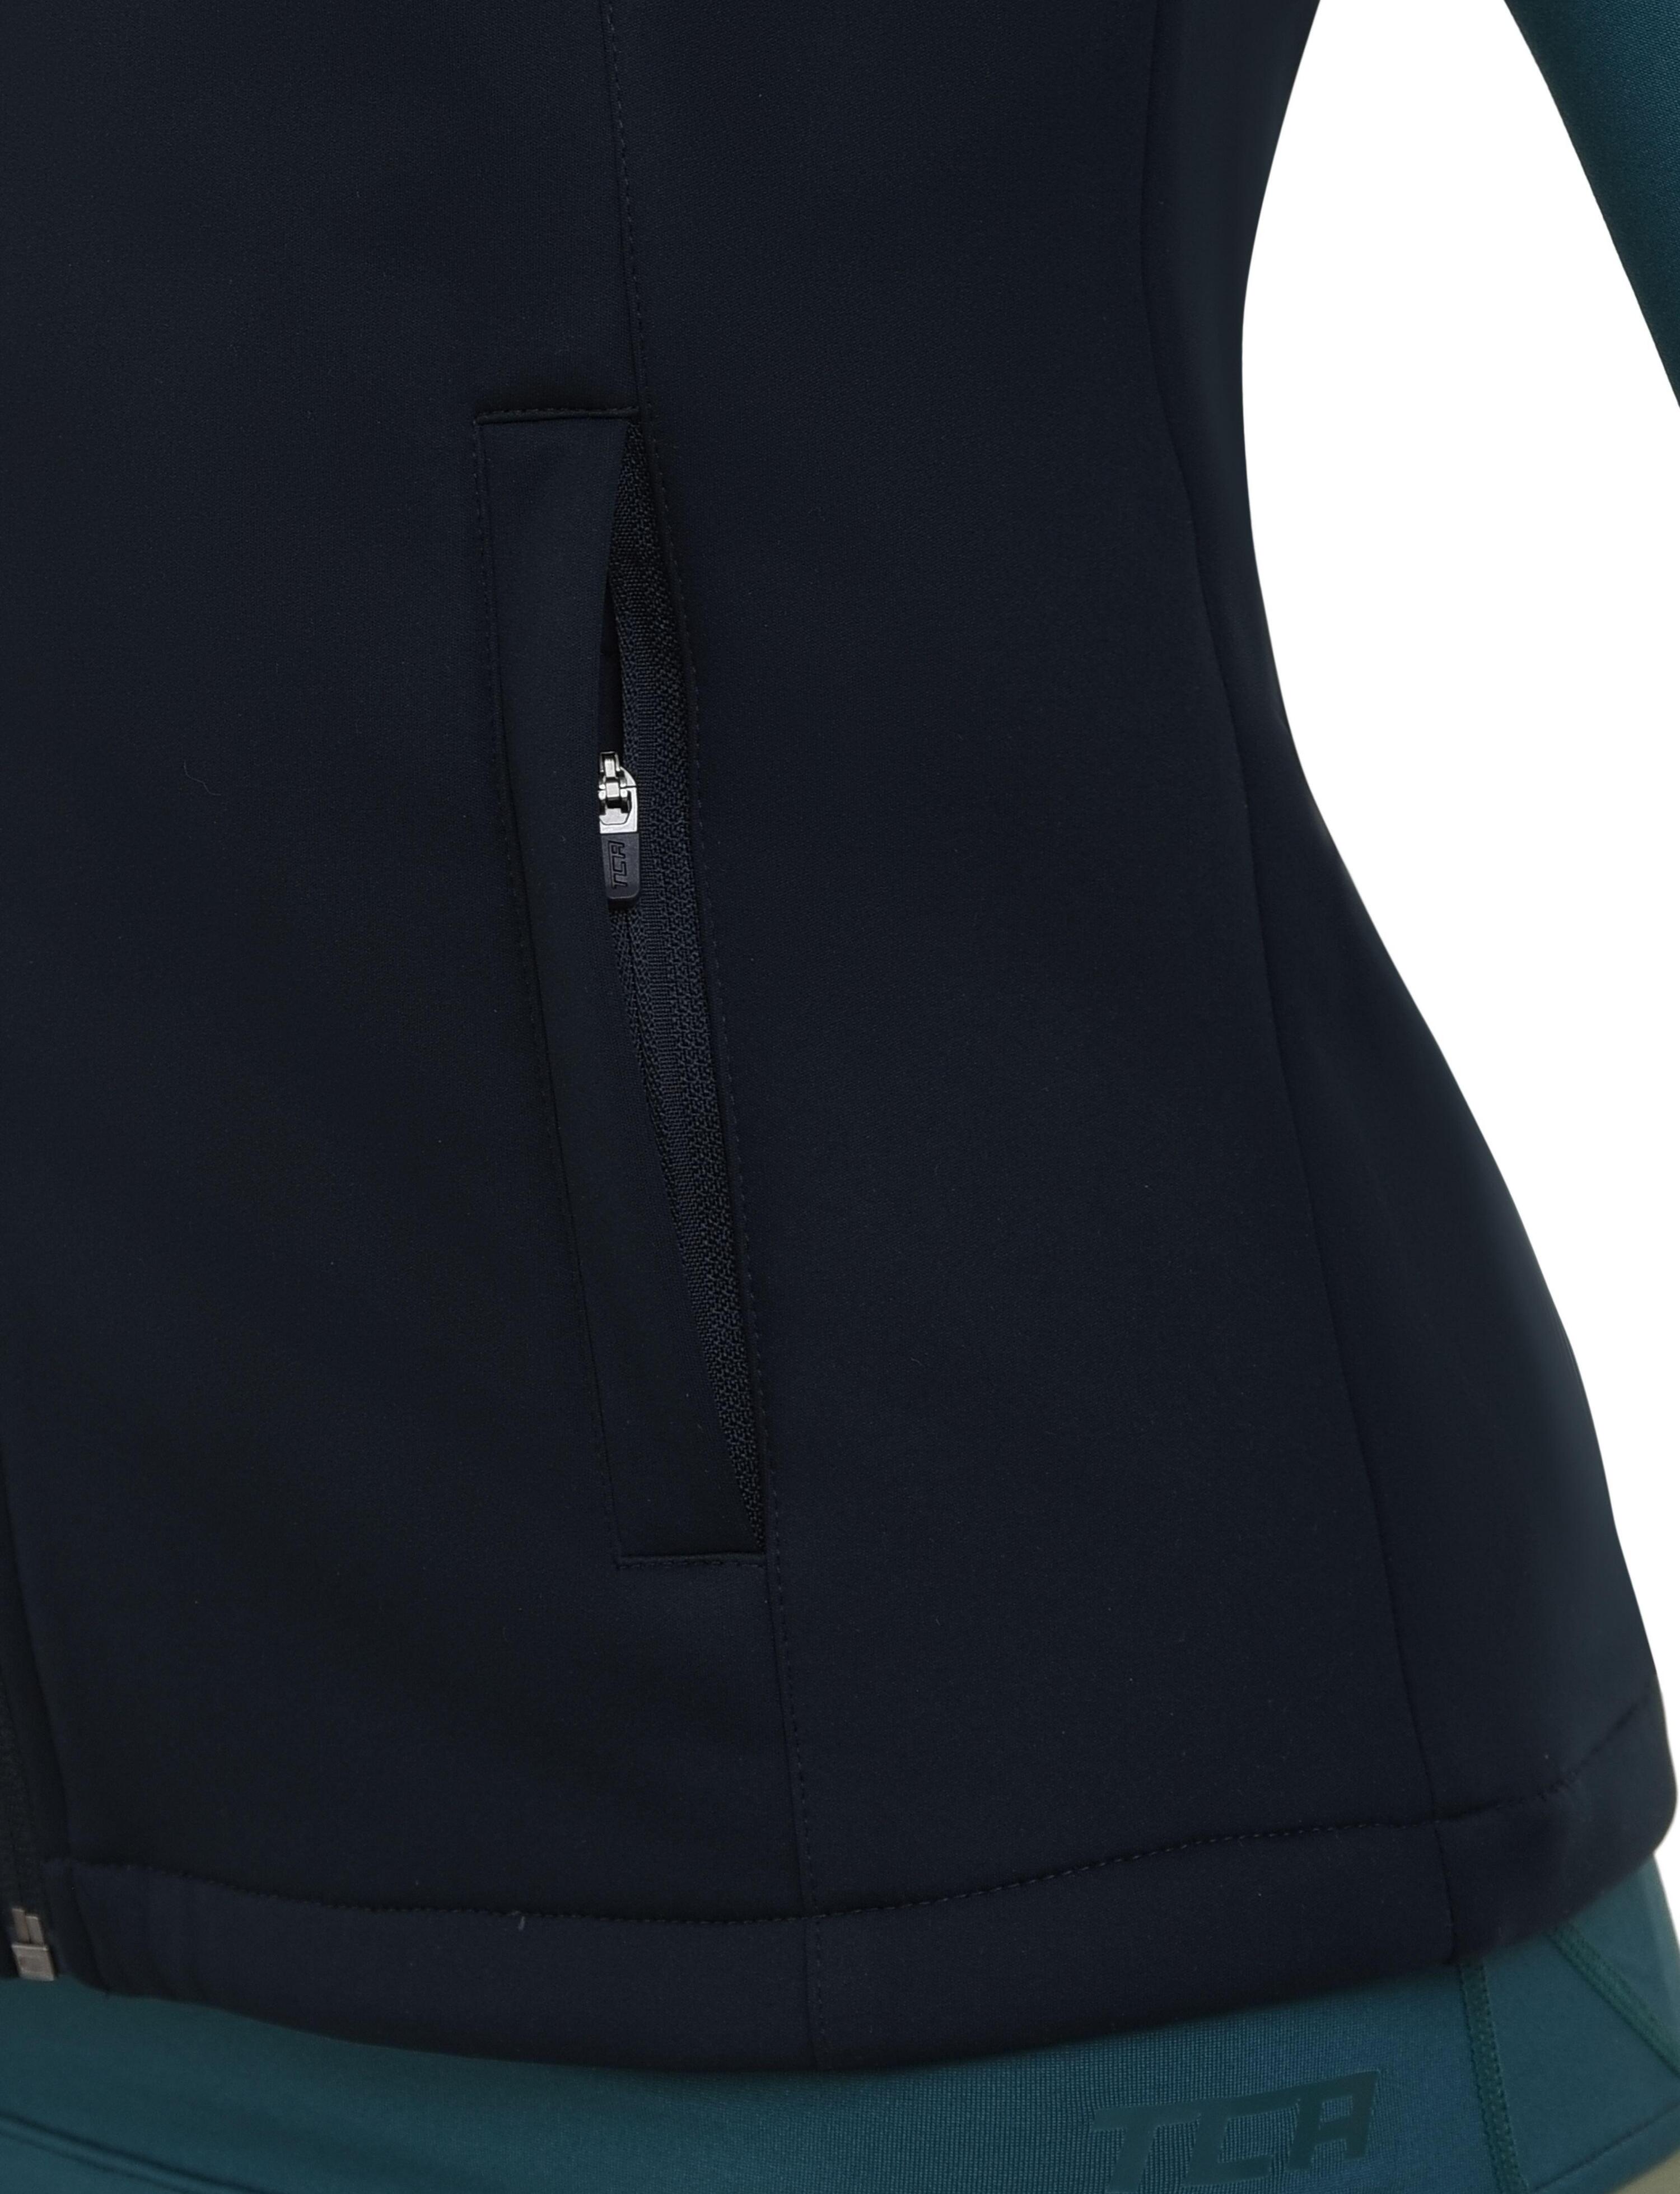 Women's Wind Proof Gilet with Zip Pockets - Black Stealth 3/5